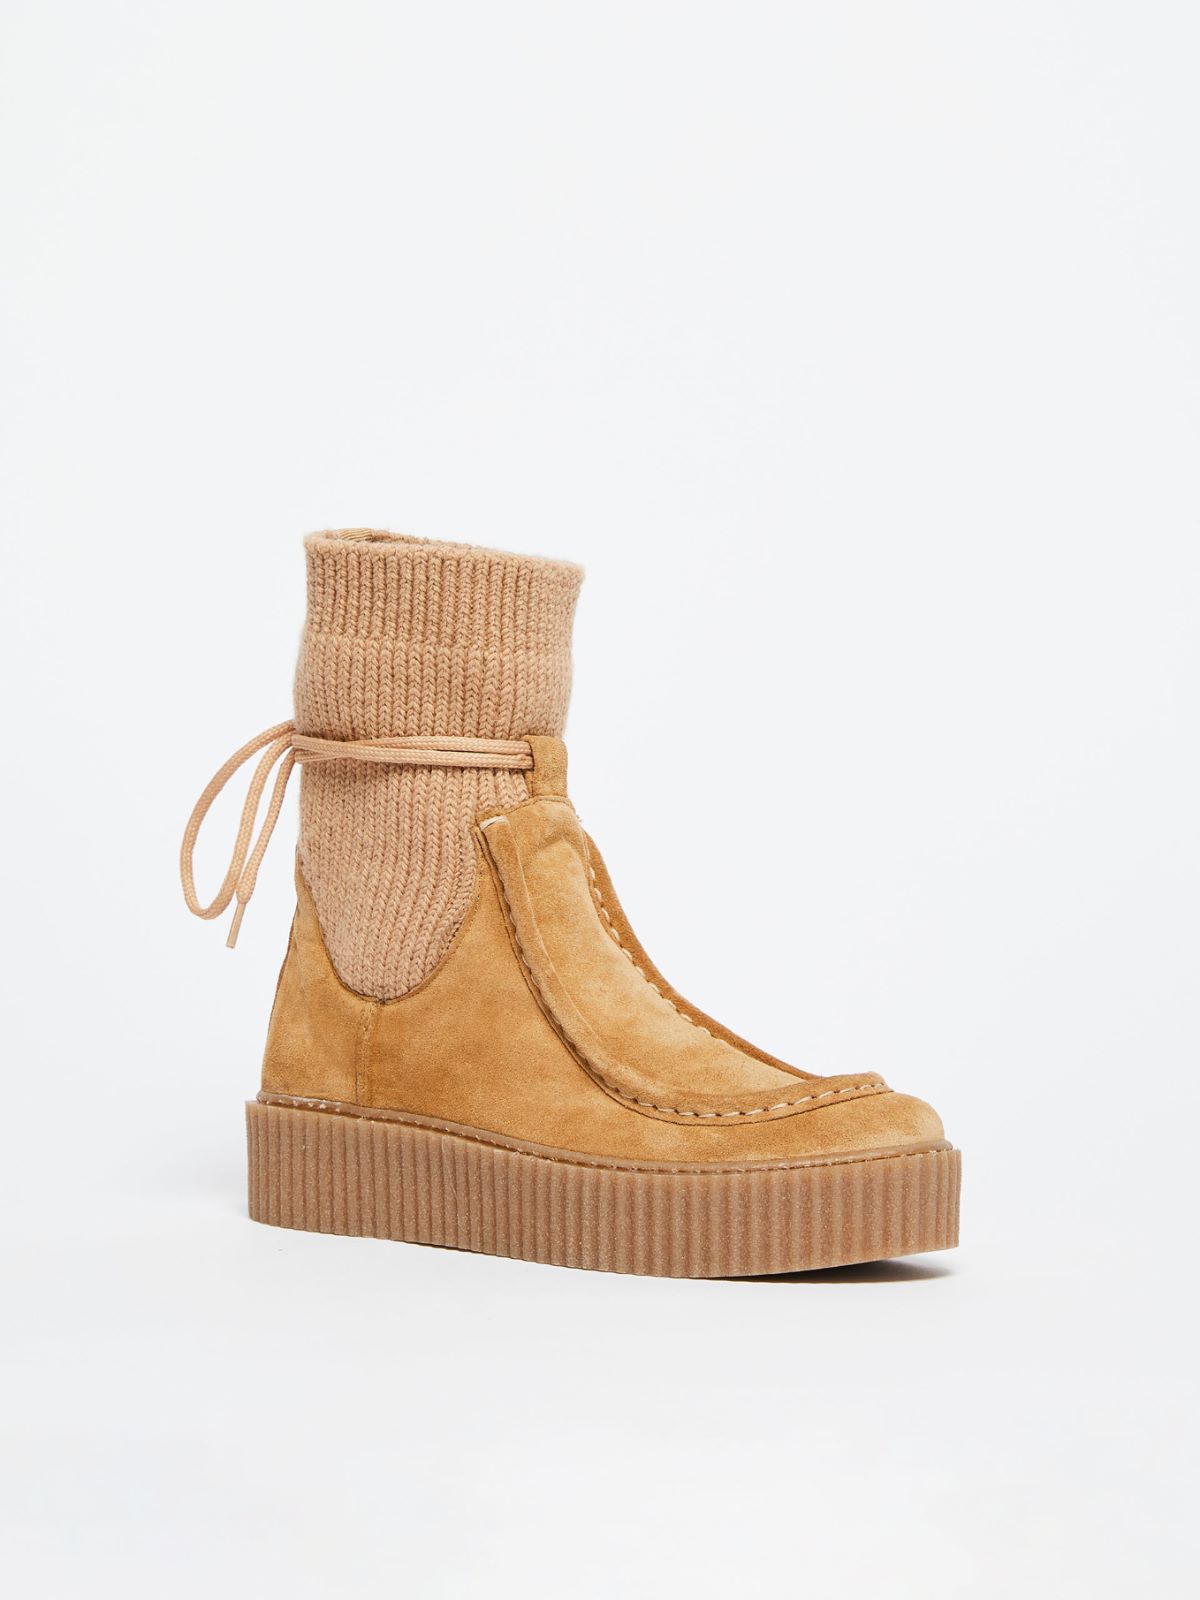 Split leather and knit ankle boots - MUSTARD - Weekend Max Mara - 2